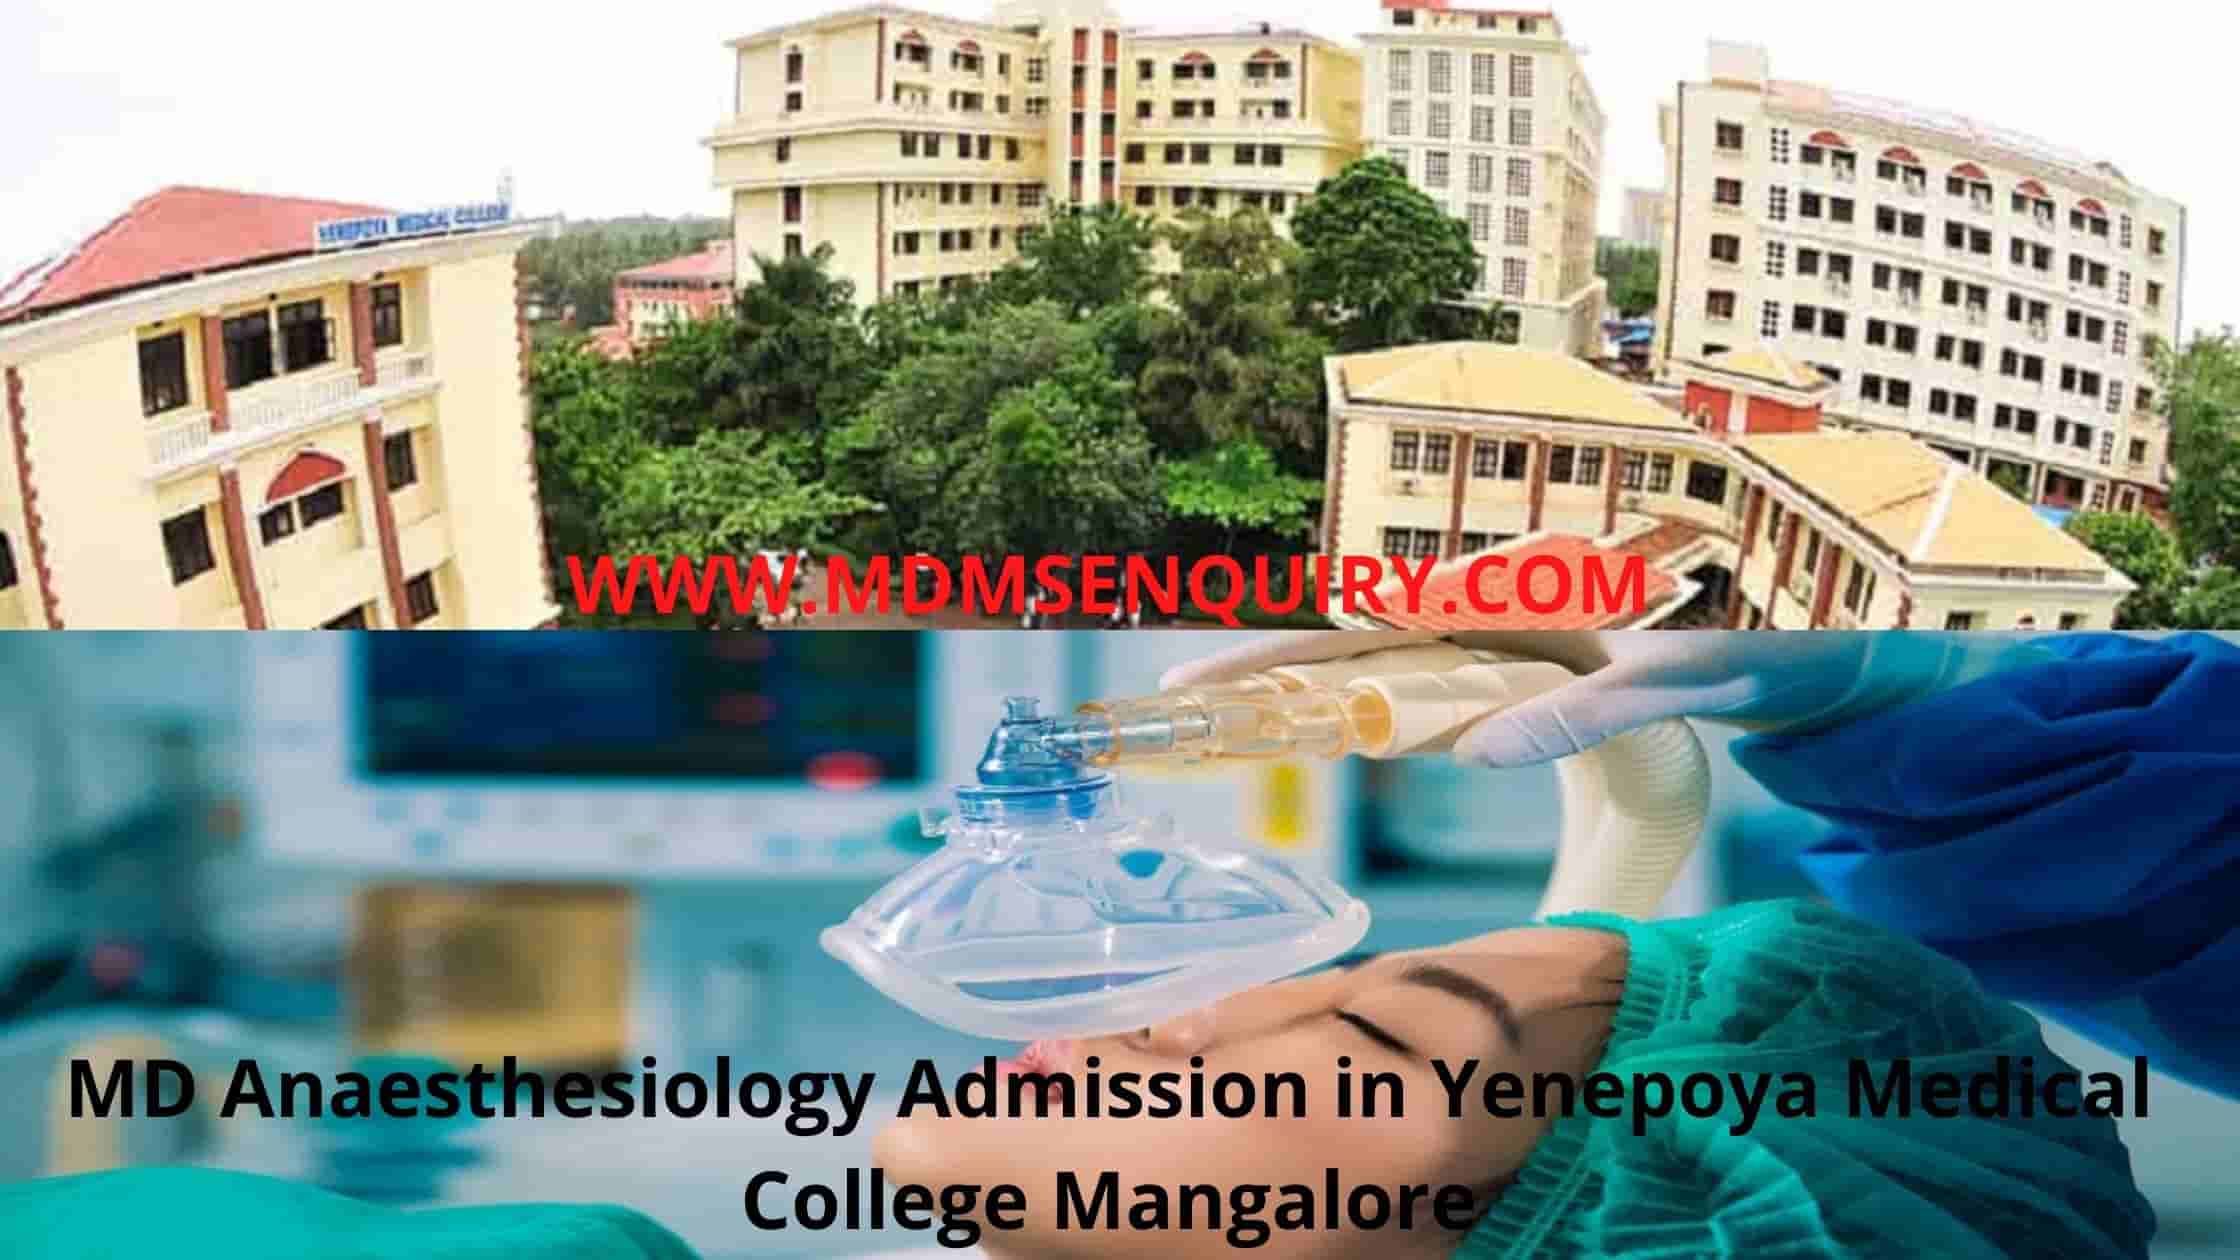 MD Anaesthesiology Admission in Yenepoya Medical College Mangalore